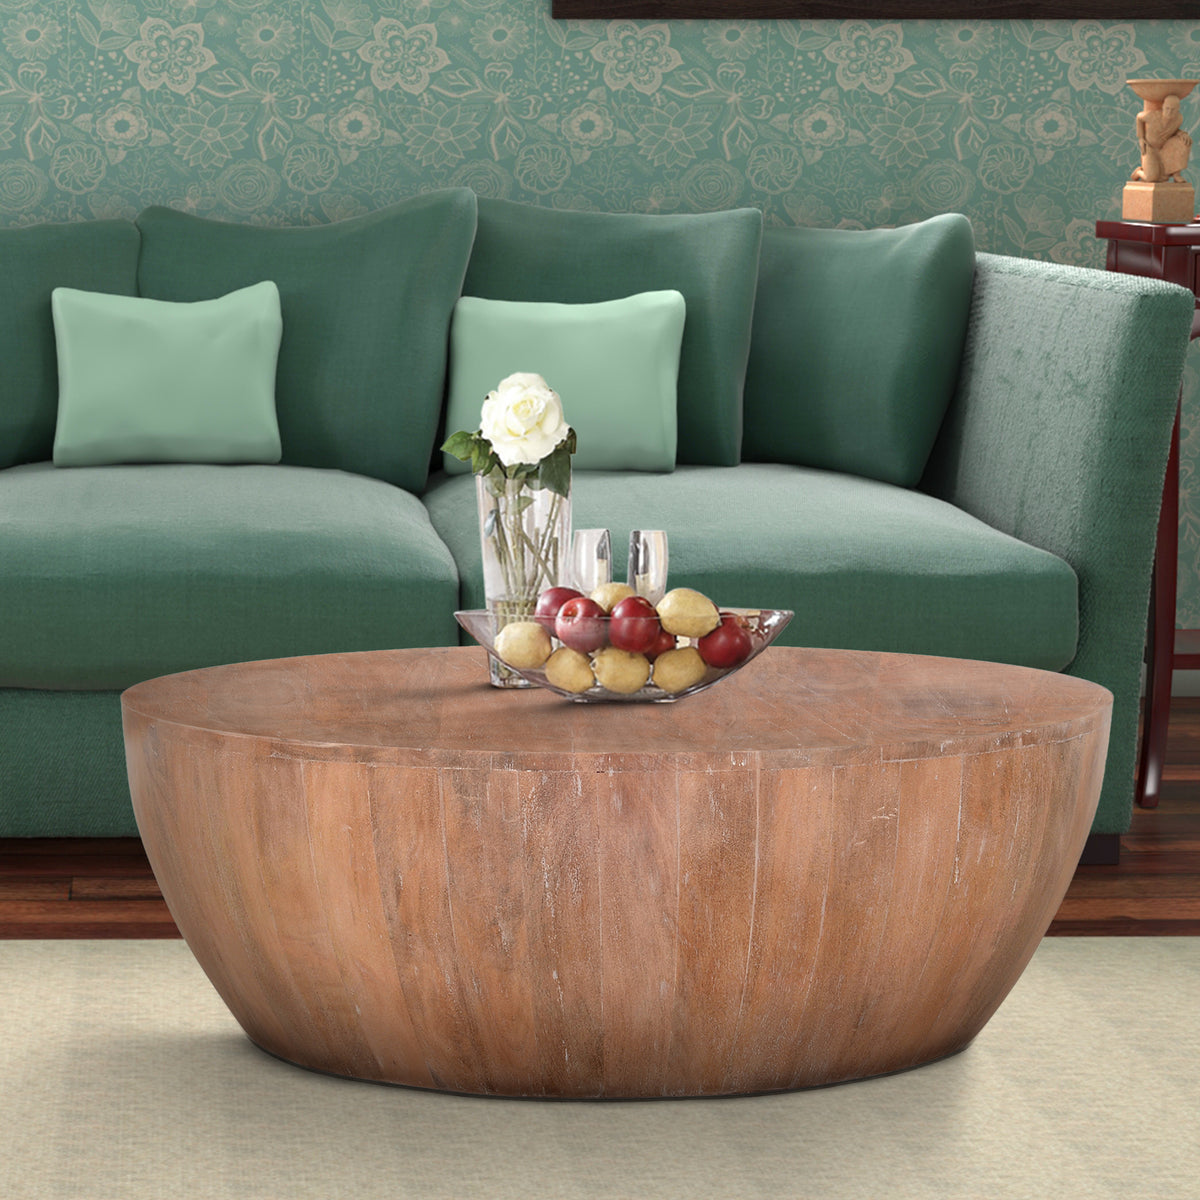 Arthur Drum Shape Wooden Coffee Table with Plank Design Base, Distressed Brown - UPT-32182